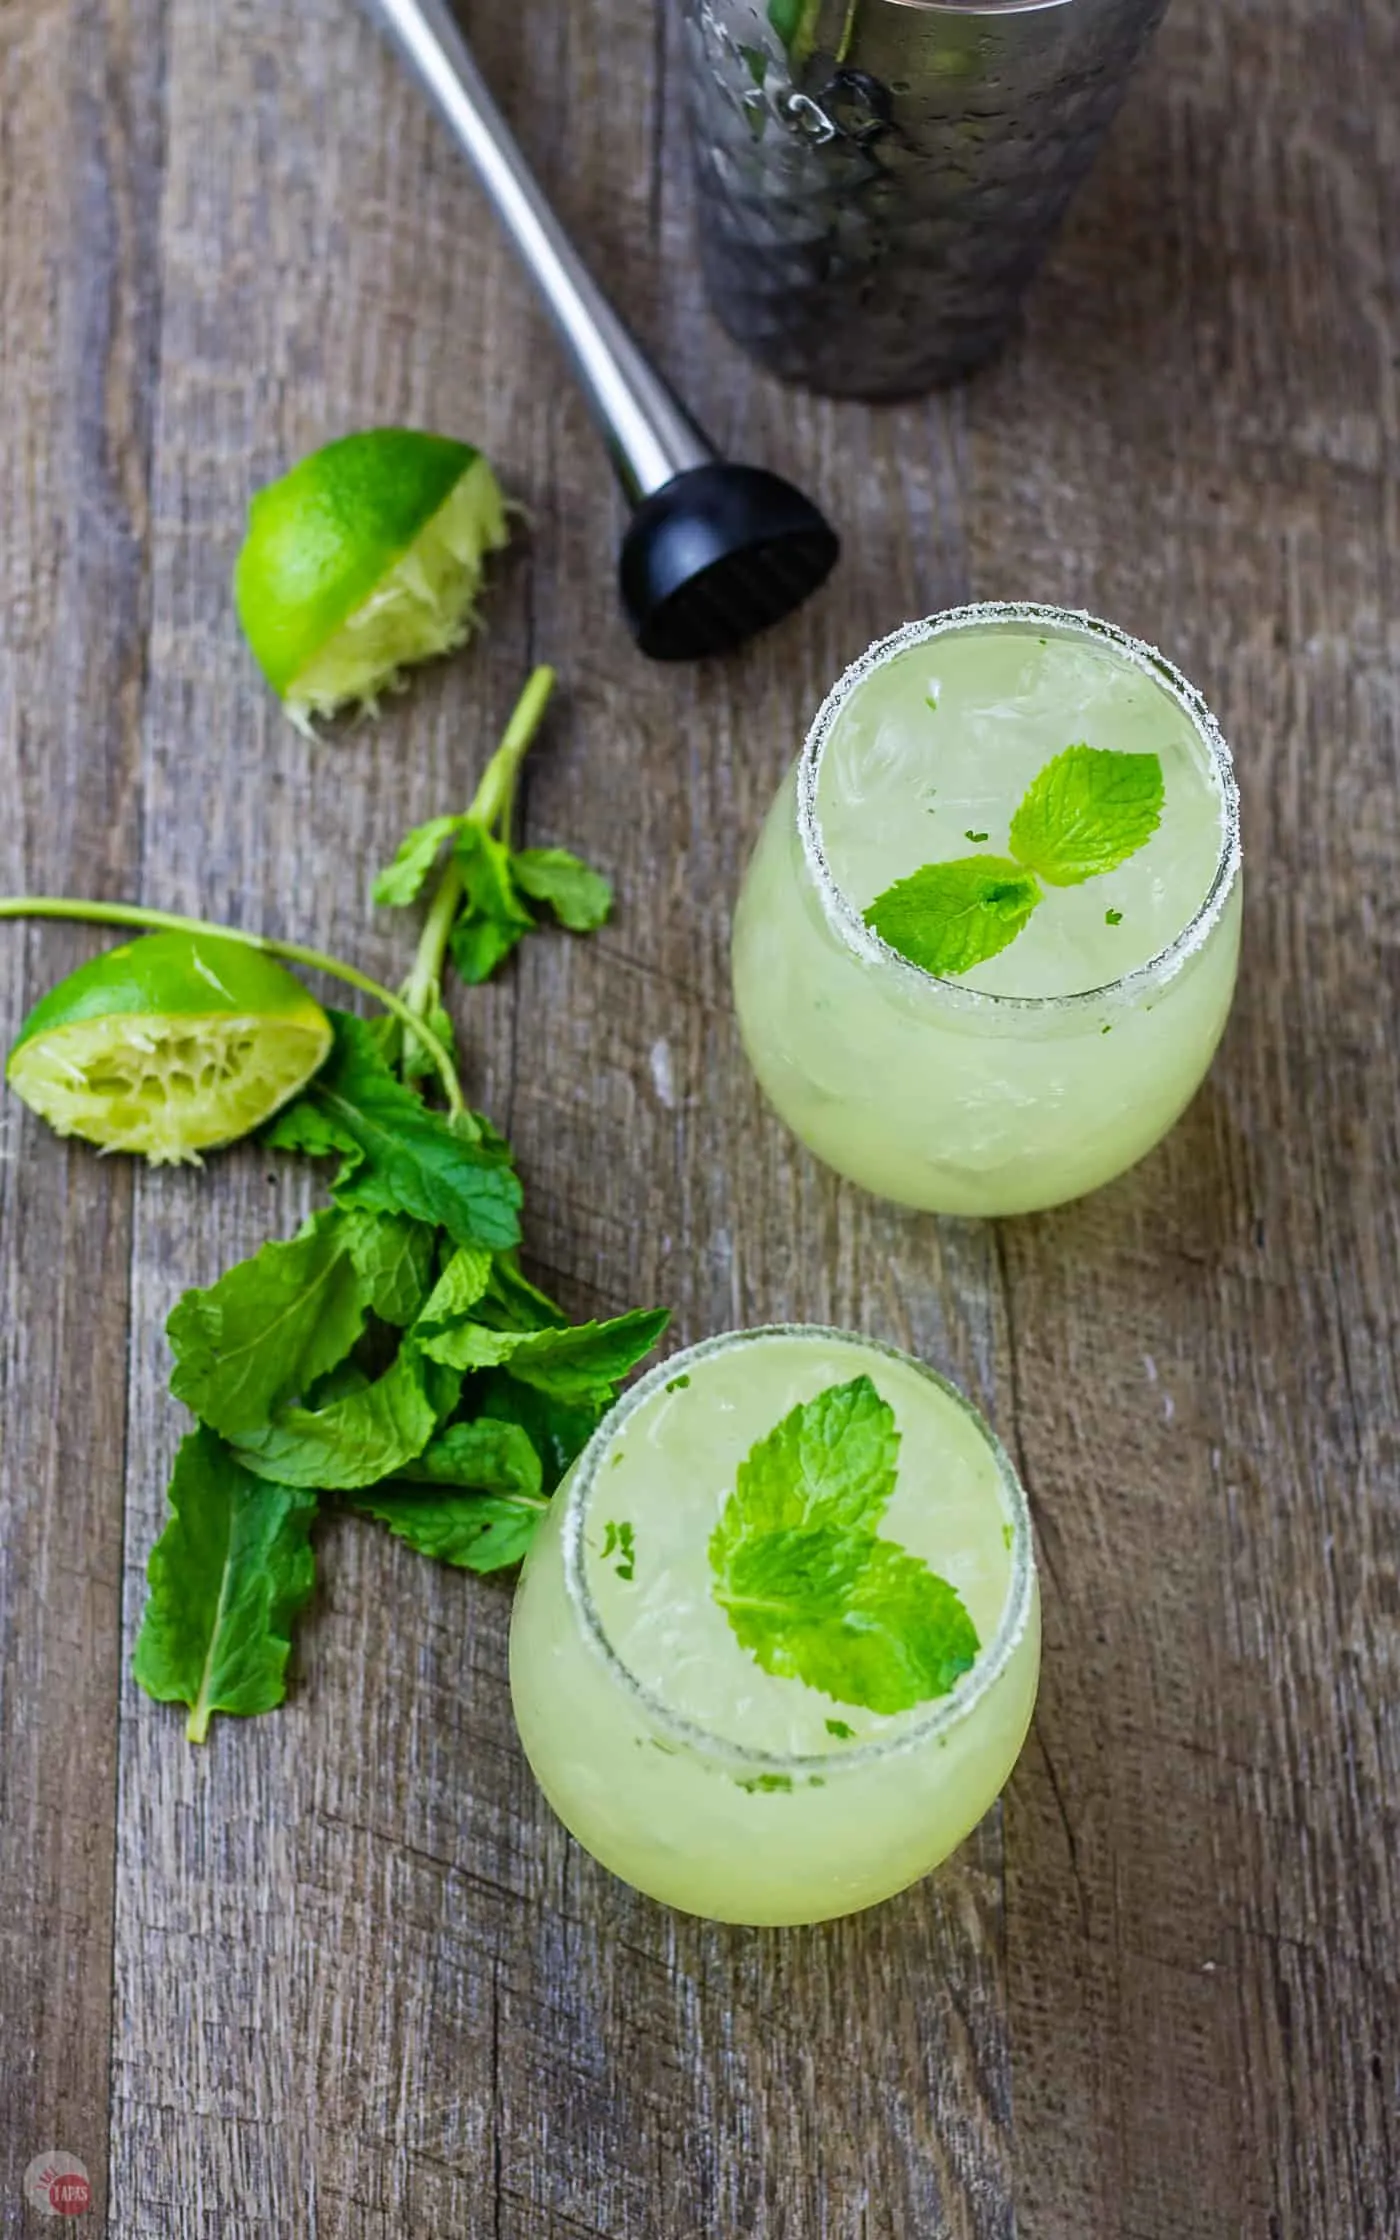 Make a Mariachi Mash for you and your guest! | Take Two Tapas | #Limoncello #Lime #Tequila #Cocktails #SummerEntertaining #EasyCocktails